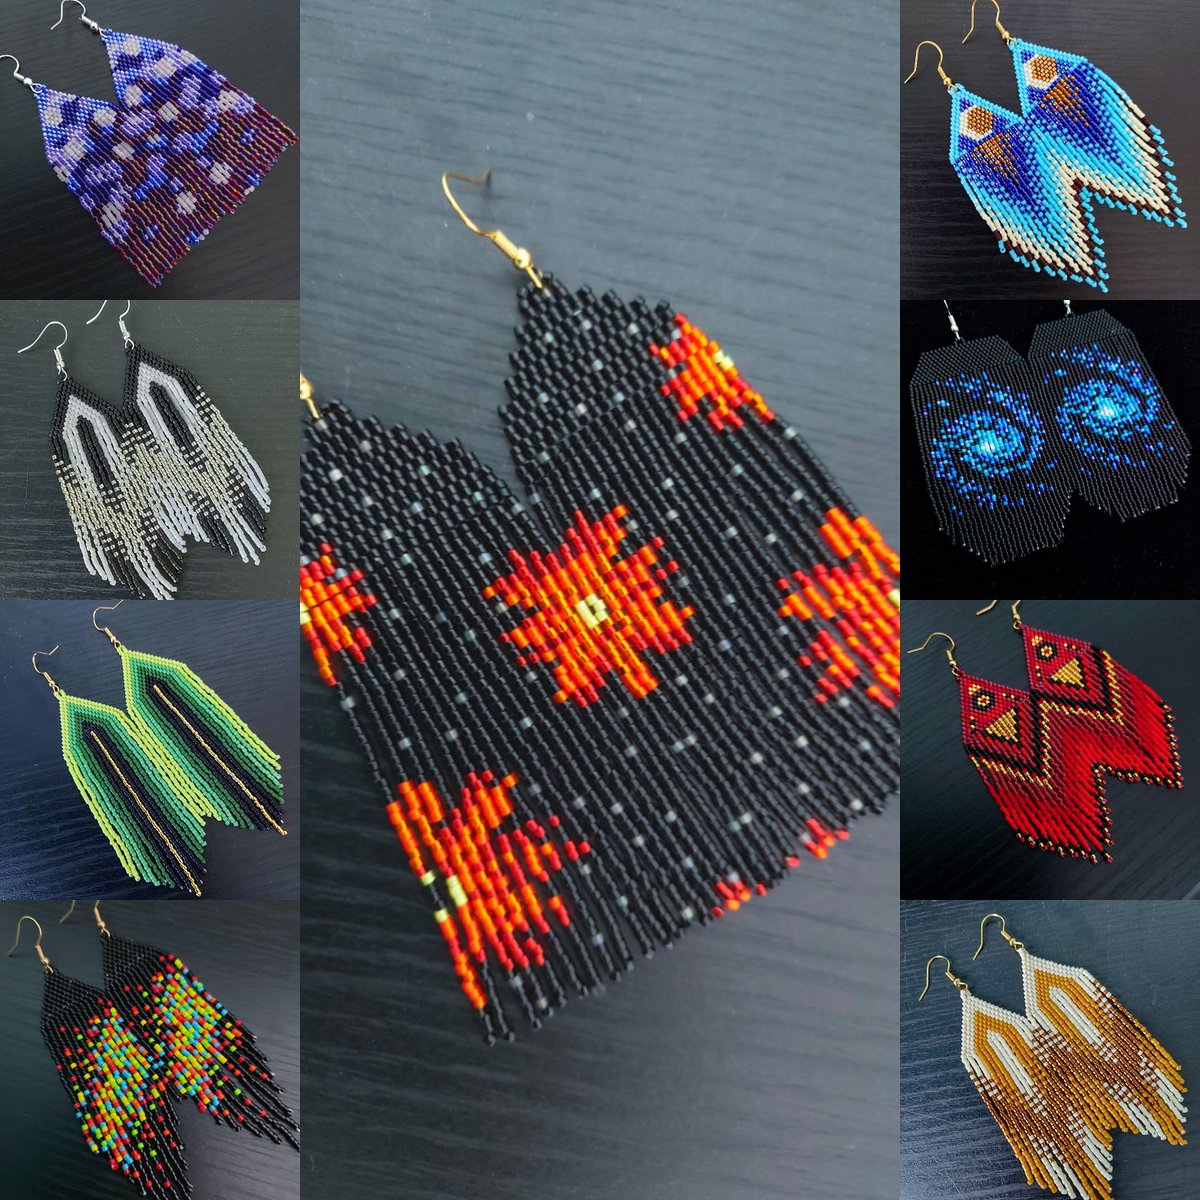 Check out the newest additions! 

etsy.com/uk/shop/TheWhe…

#fringeearrings #beaded #beadedearrings #etsy #CraftBizParty #inbizhour #womaninbizhour